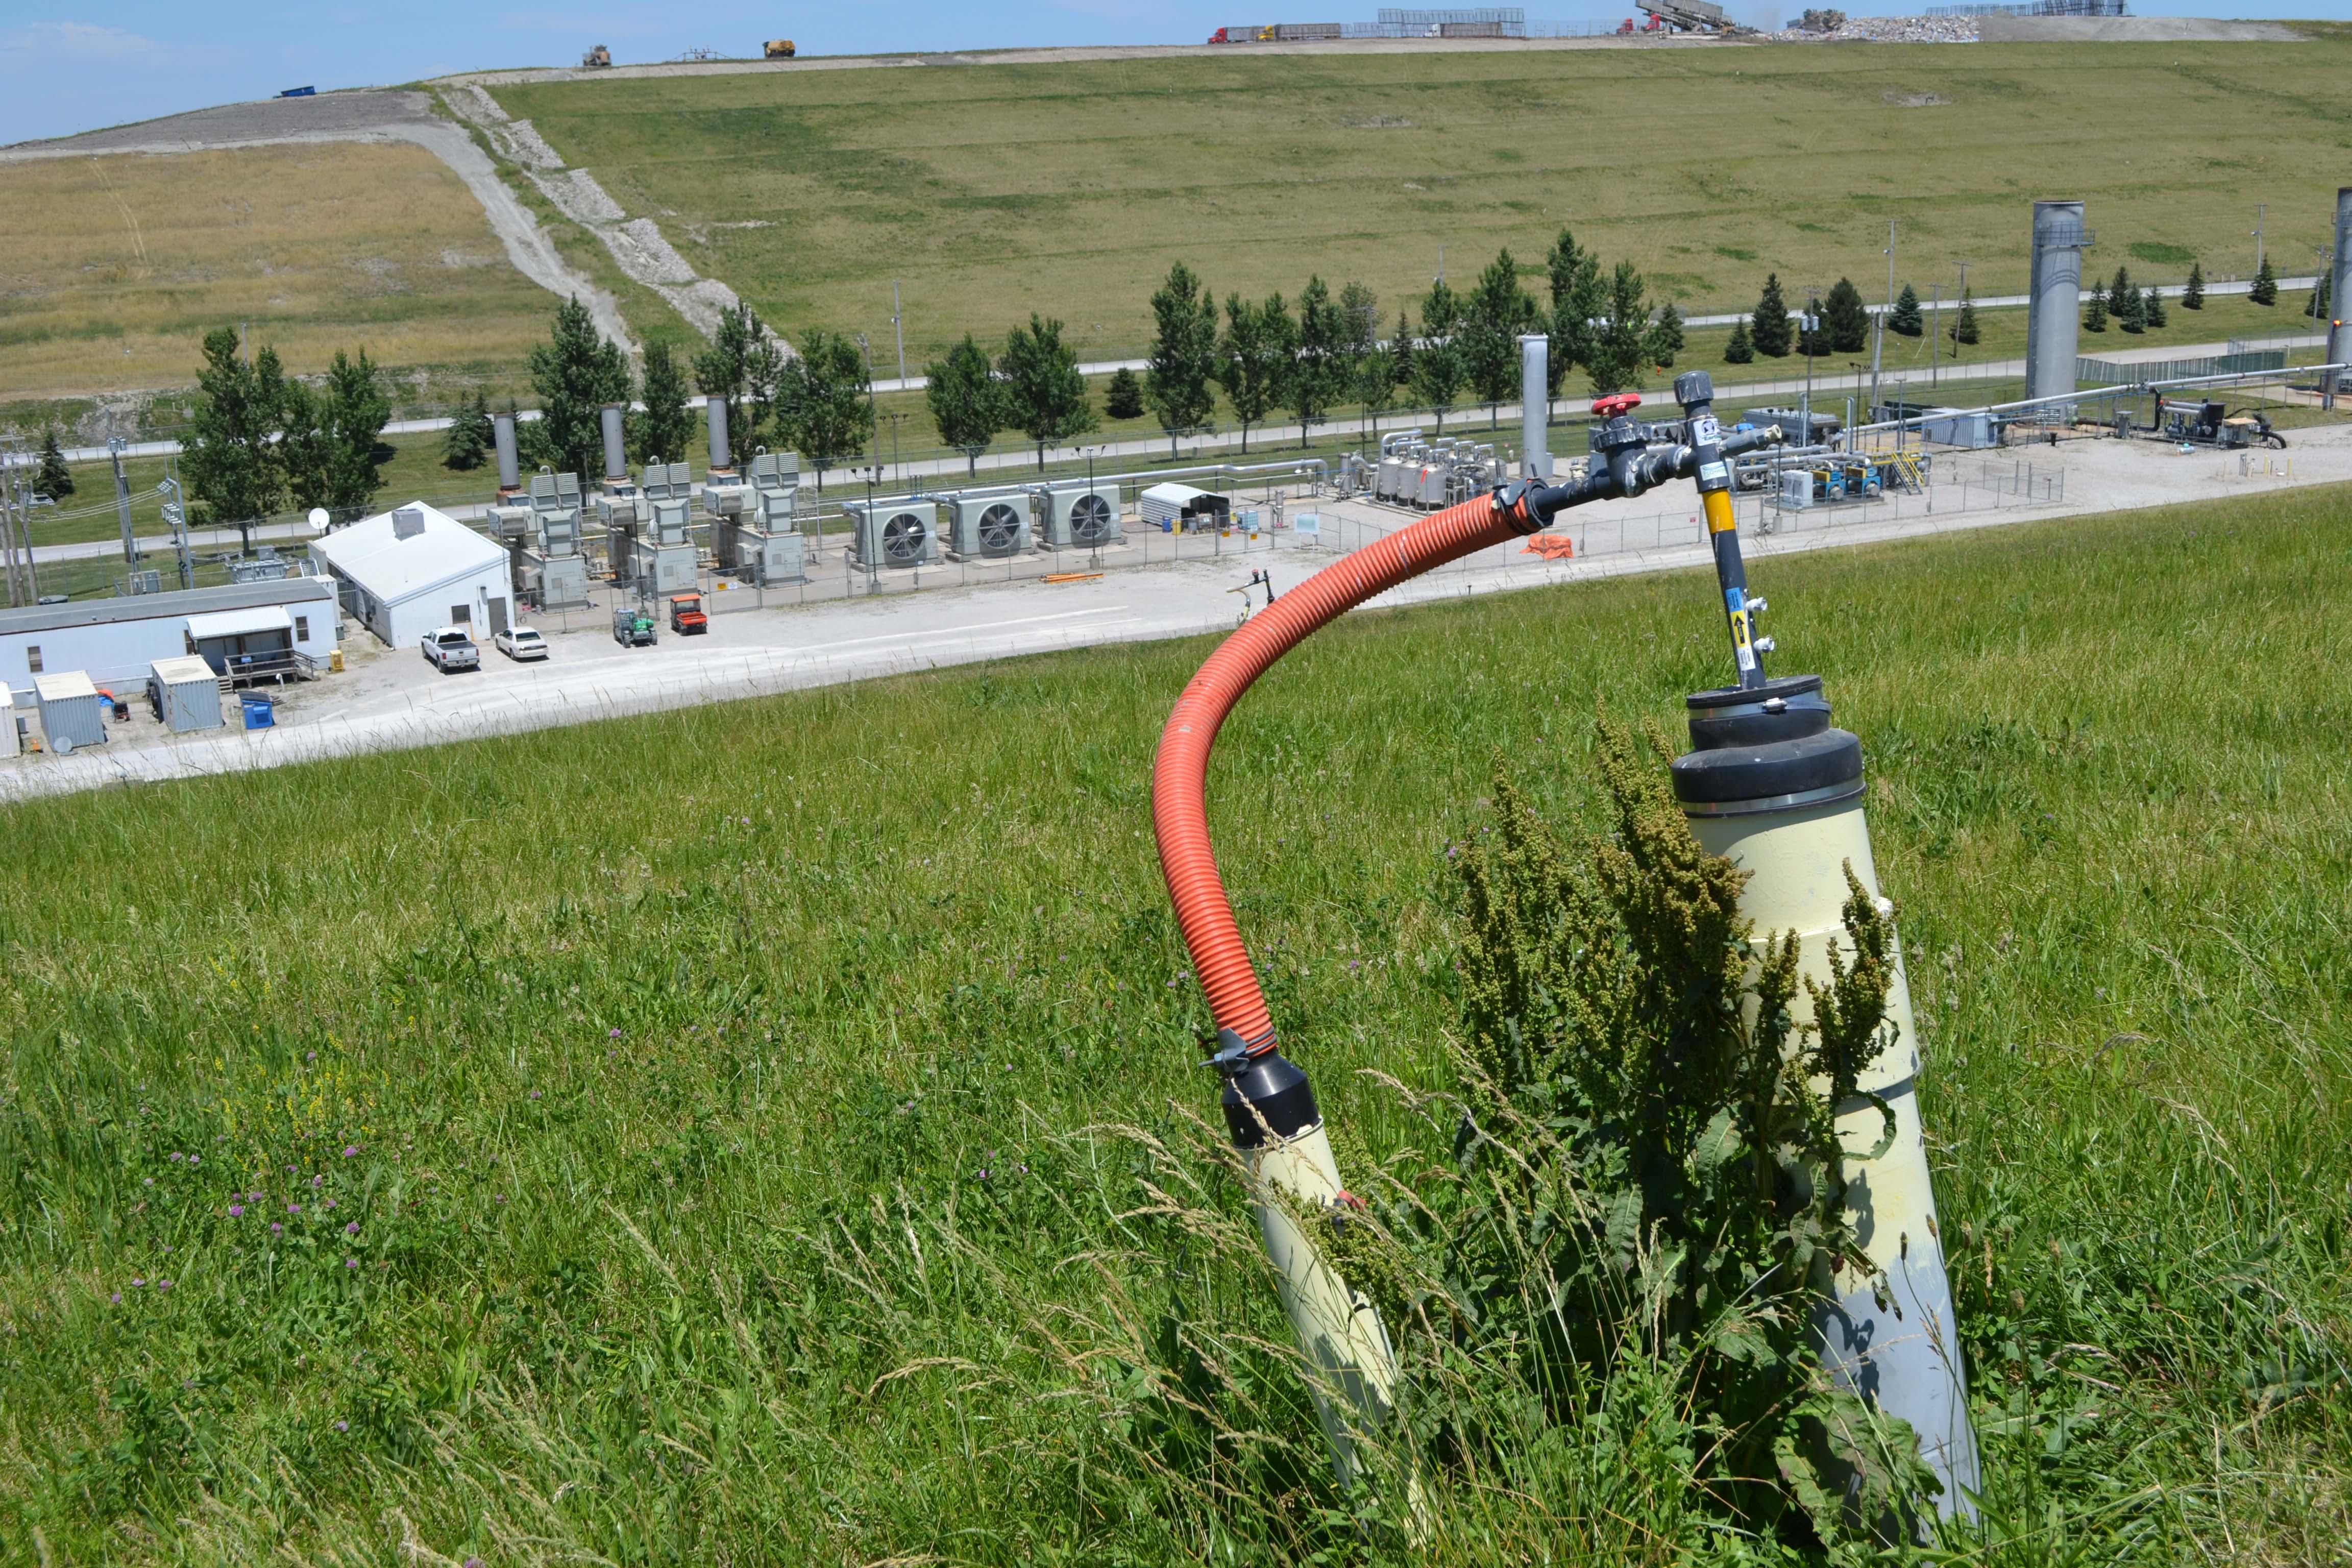 Many modern landfills employ an elaborate network of pipes and vacuums to capture greenhouse gases.